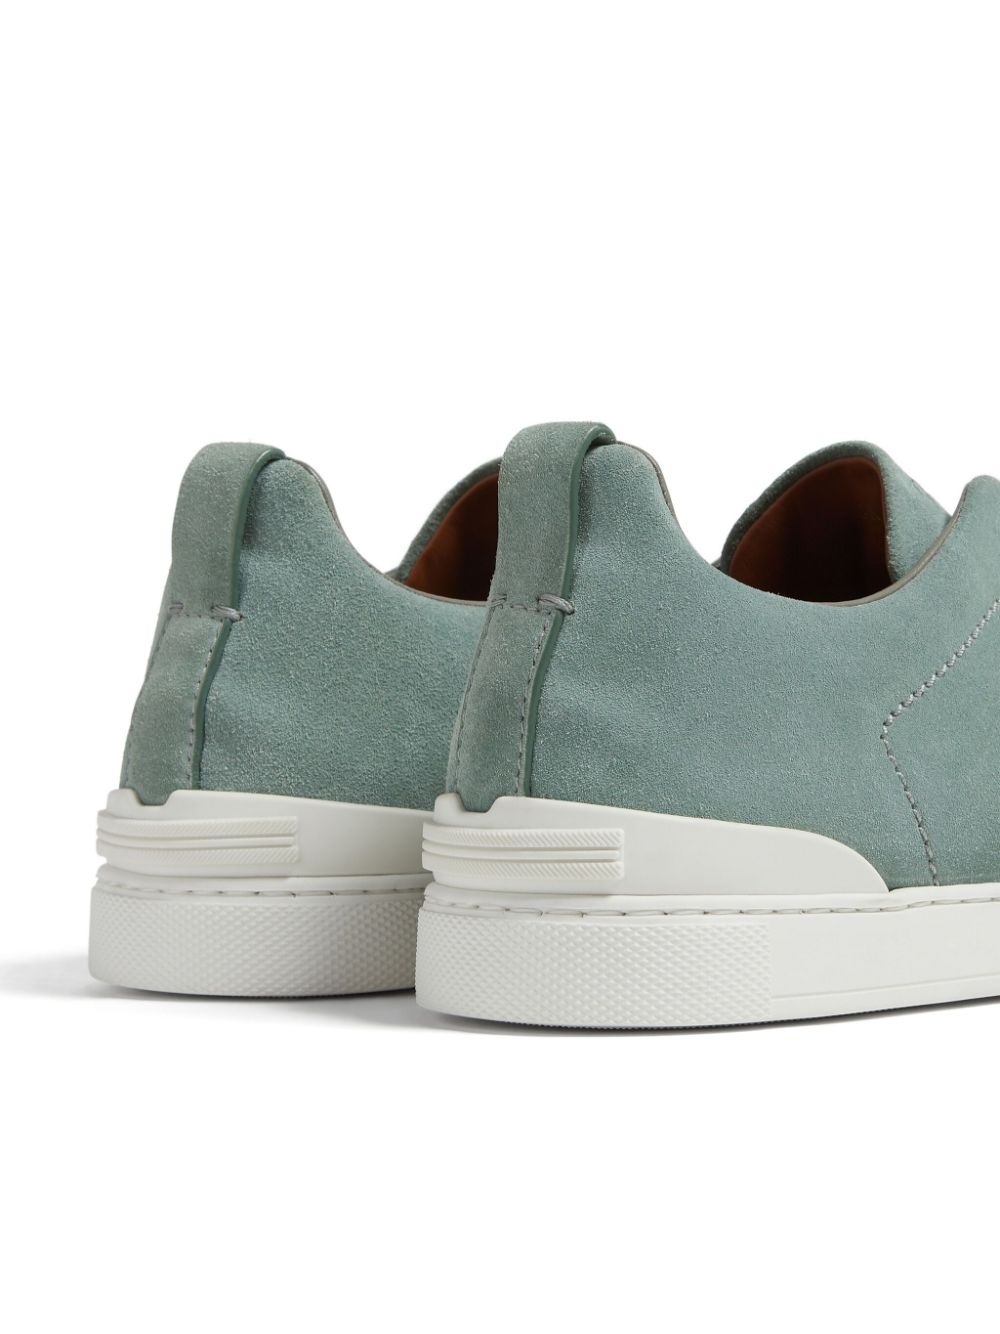 Triple Stitch suede sneakers - 5